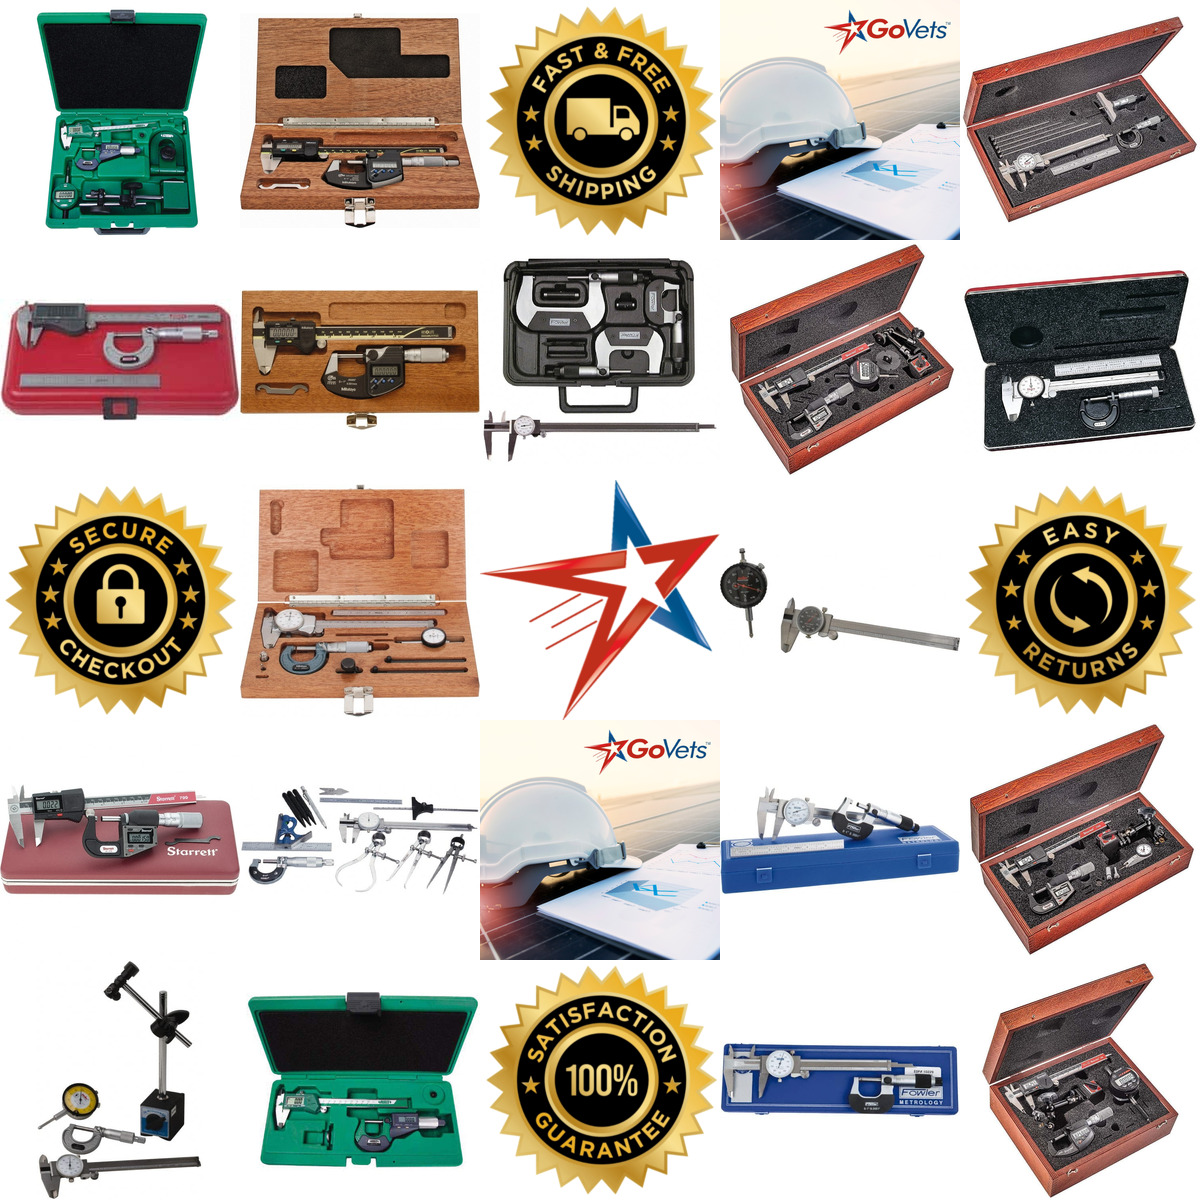 A selection of Machinist Caliper and Micrometer Tool Kits products on GoVets